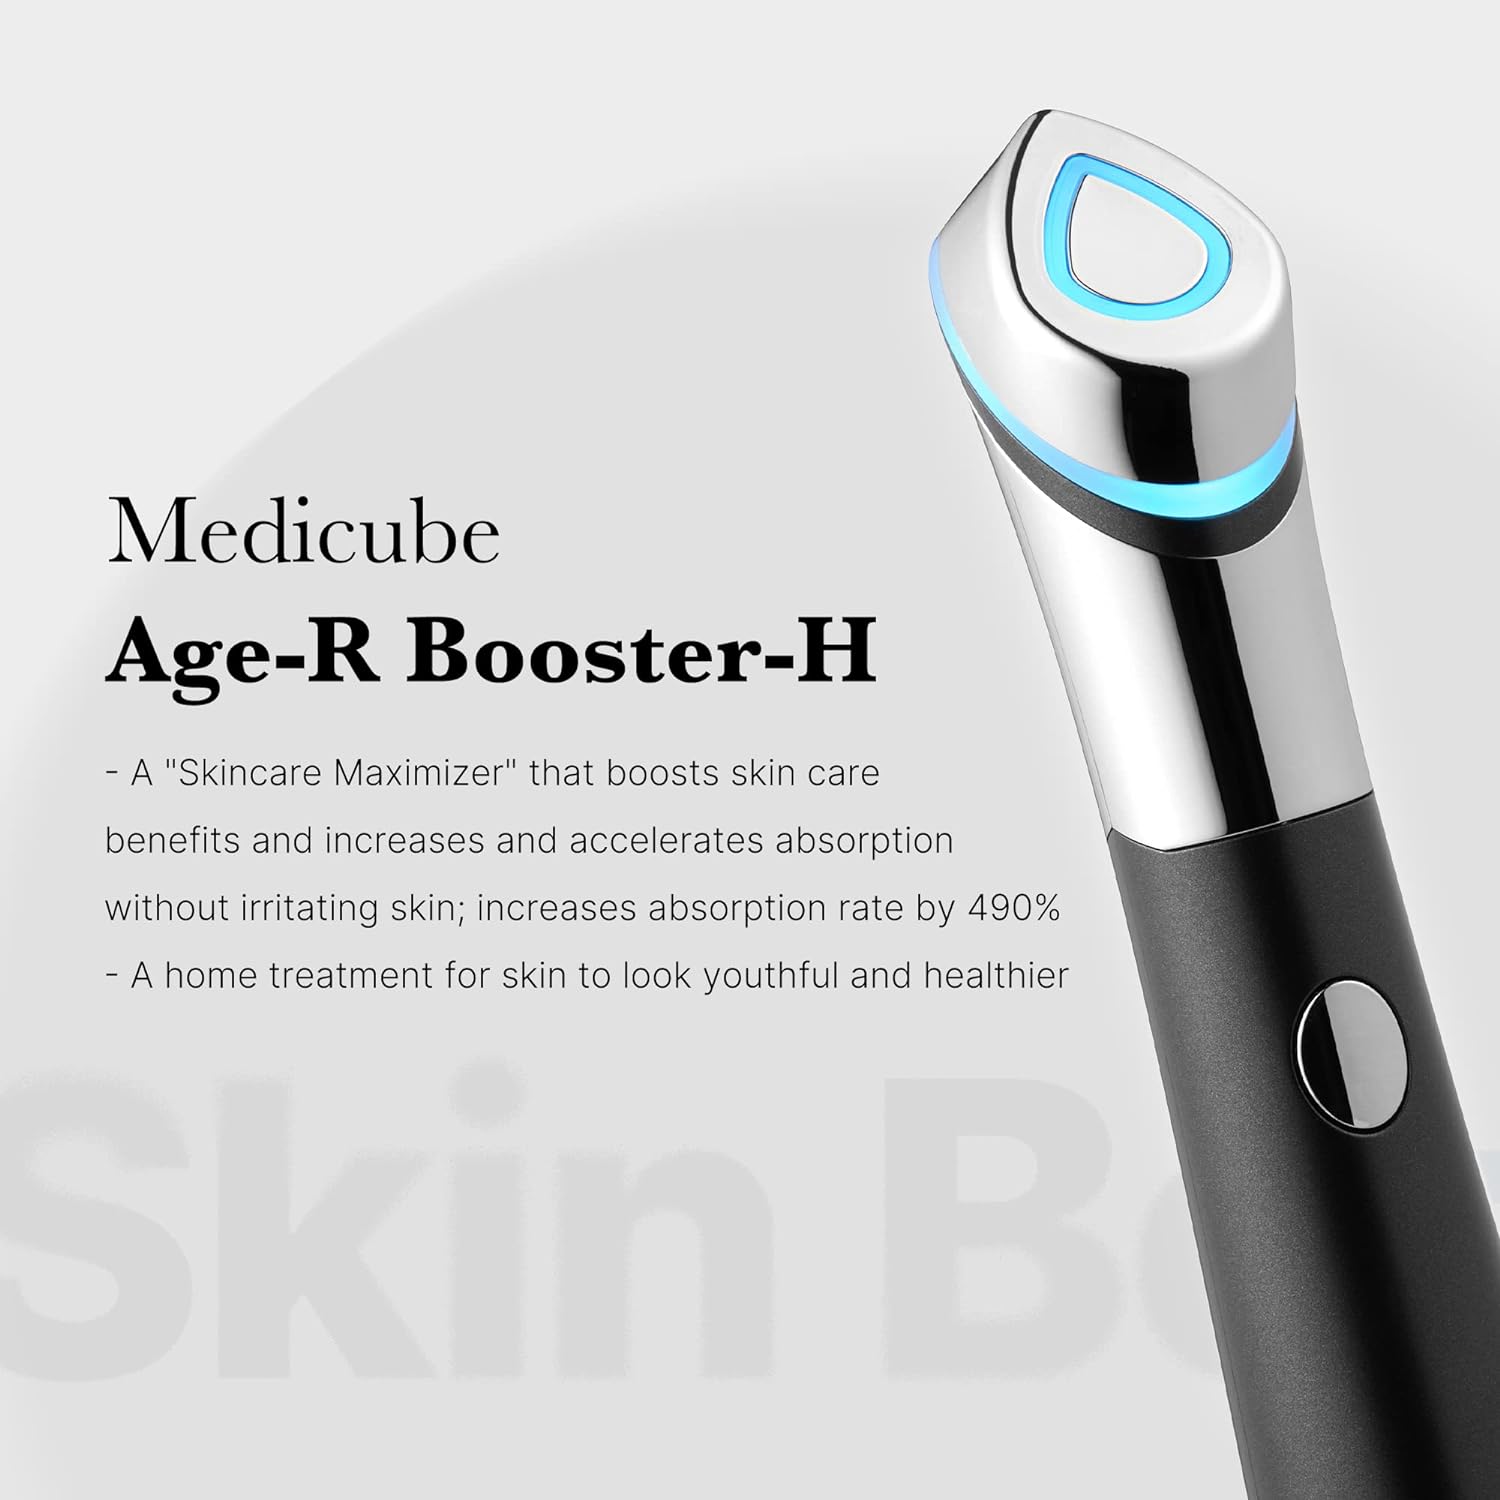 Medicube Age-R Booster H - a Facial Treatment Device for Maximizing and  Boosting Skin Care Absorption